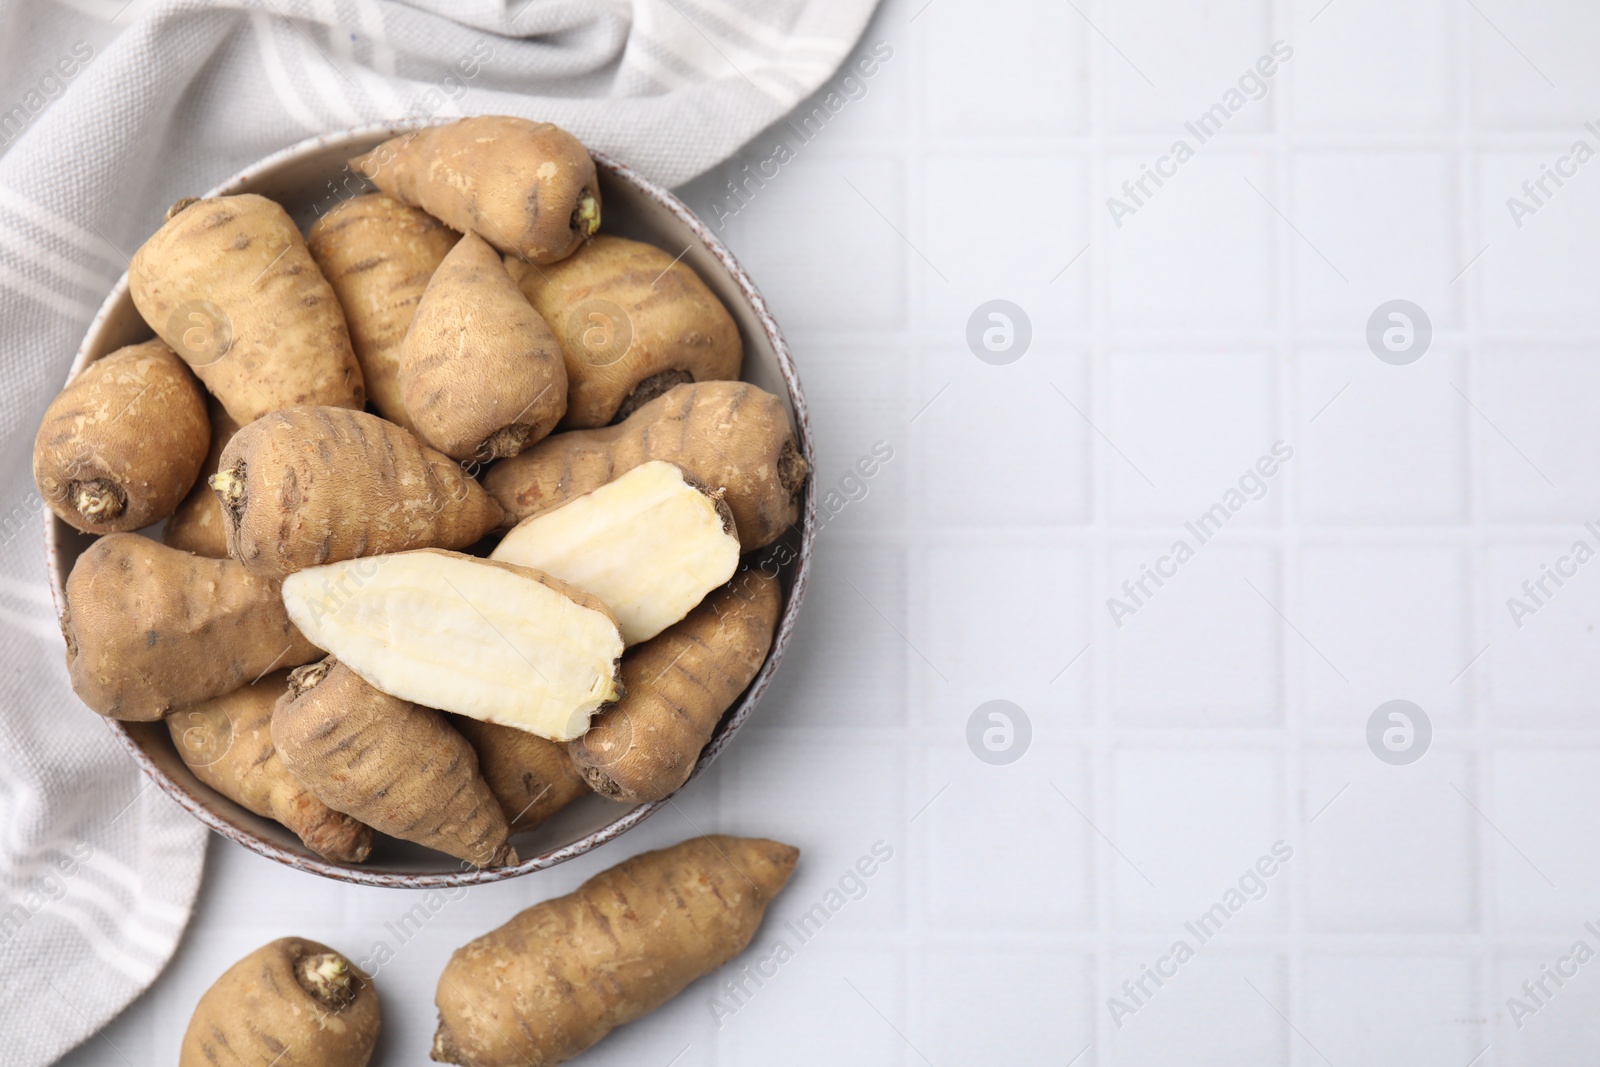 Photo of Whole and cut tubers of turnip rooted chervil in bowl on white tiled table, top view. Space for text